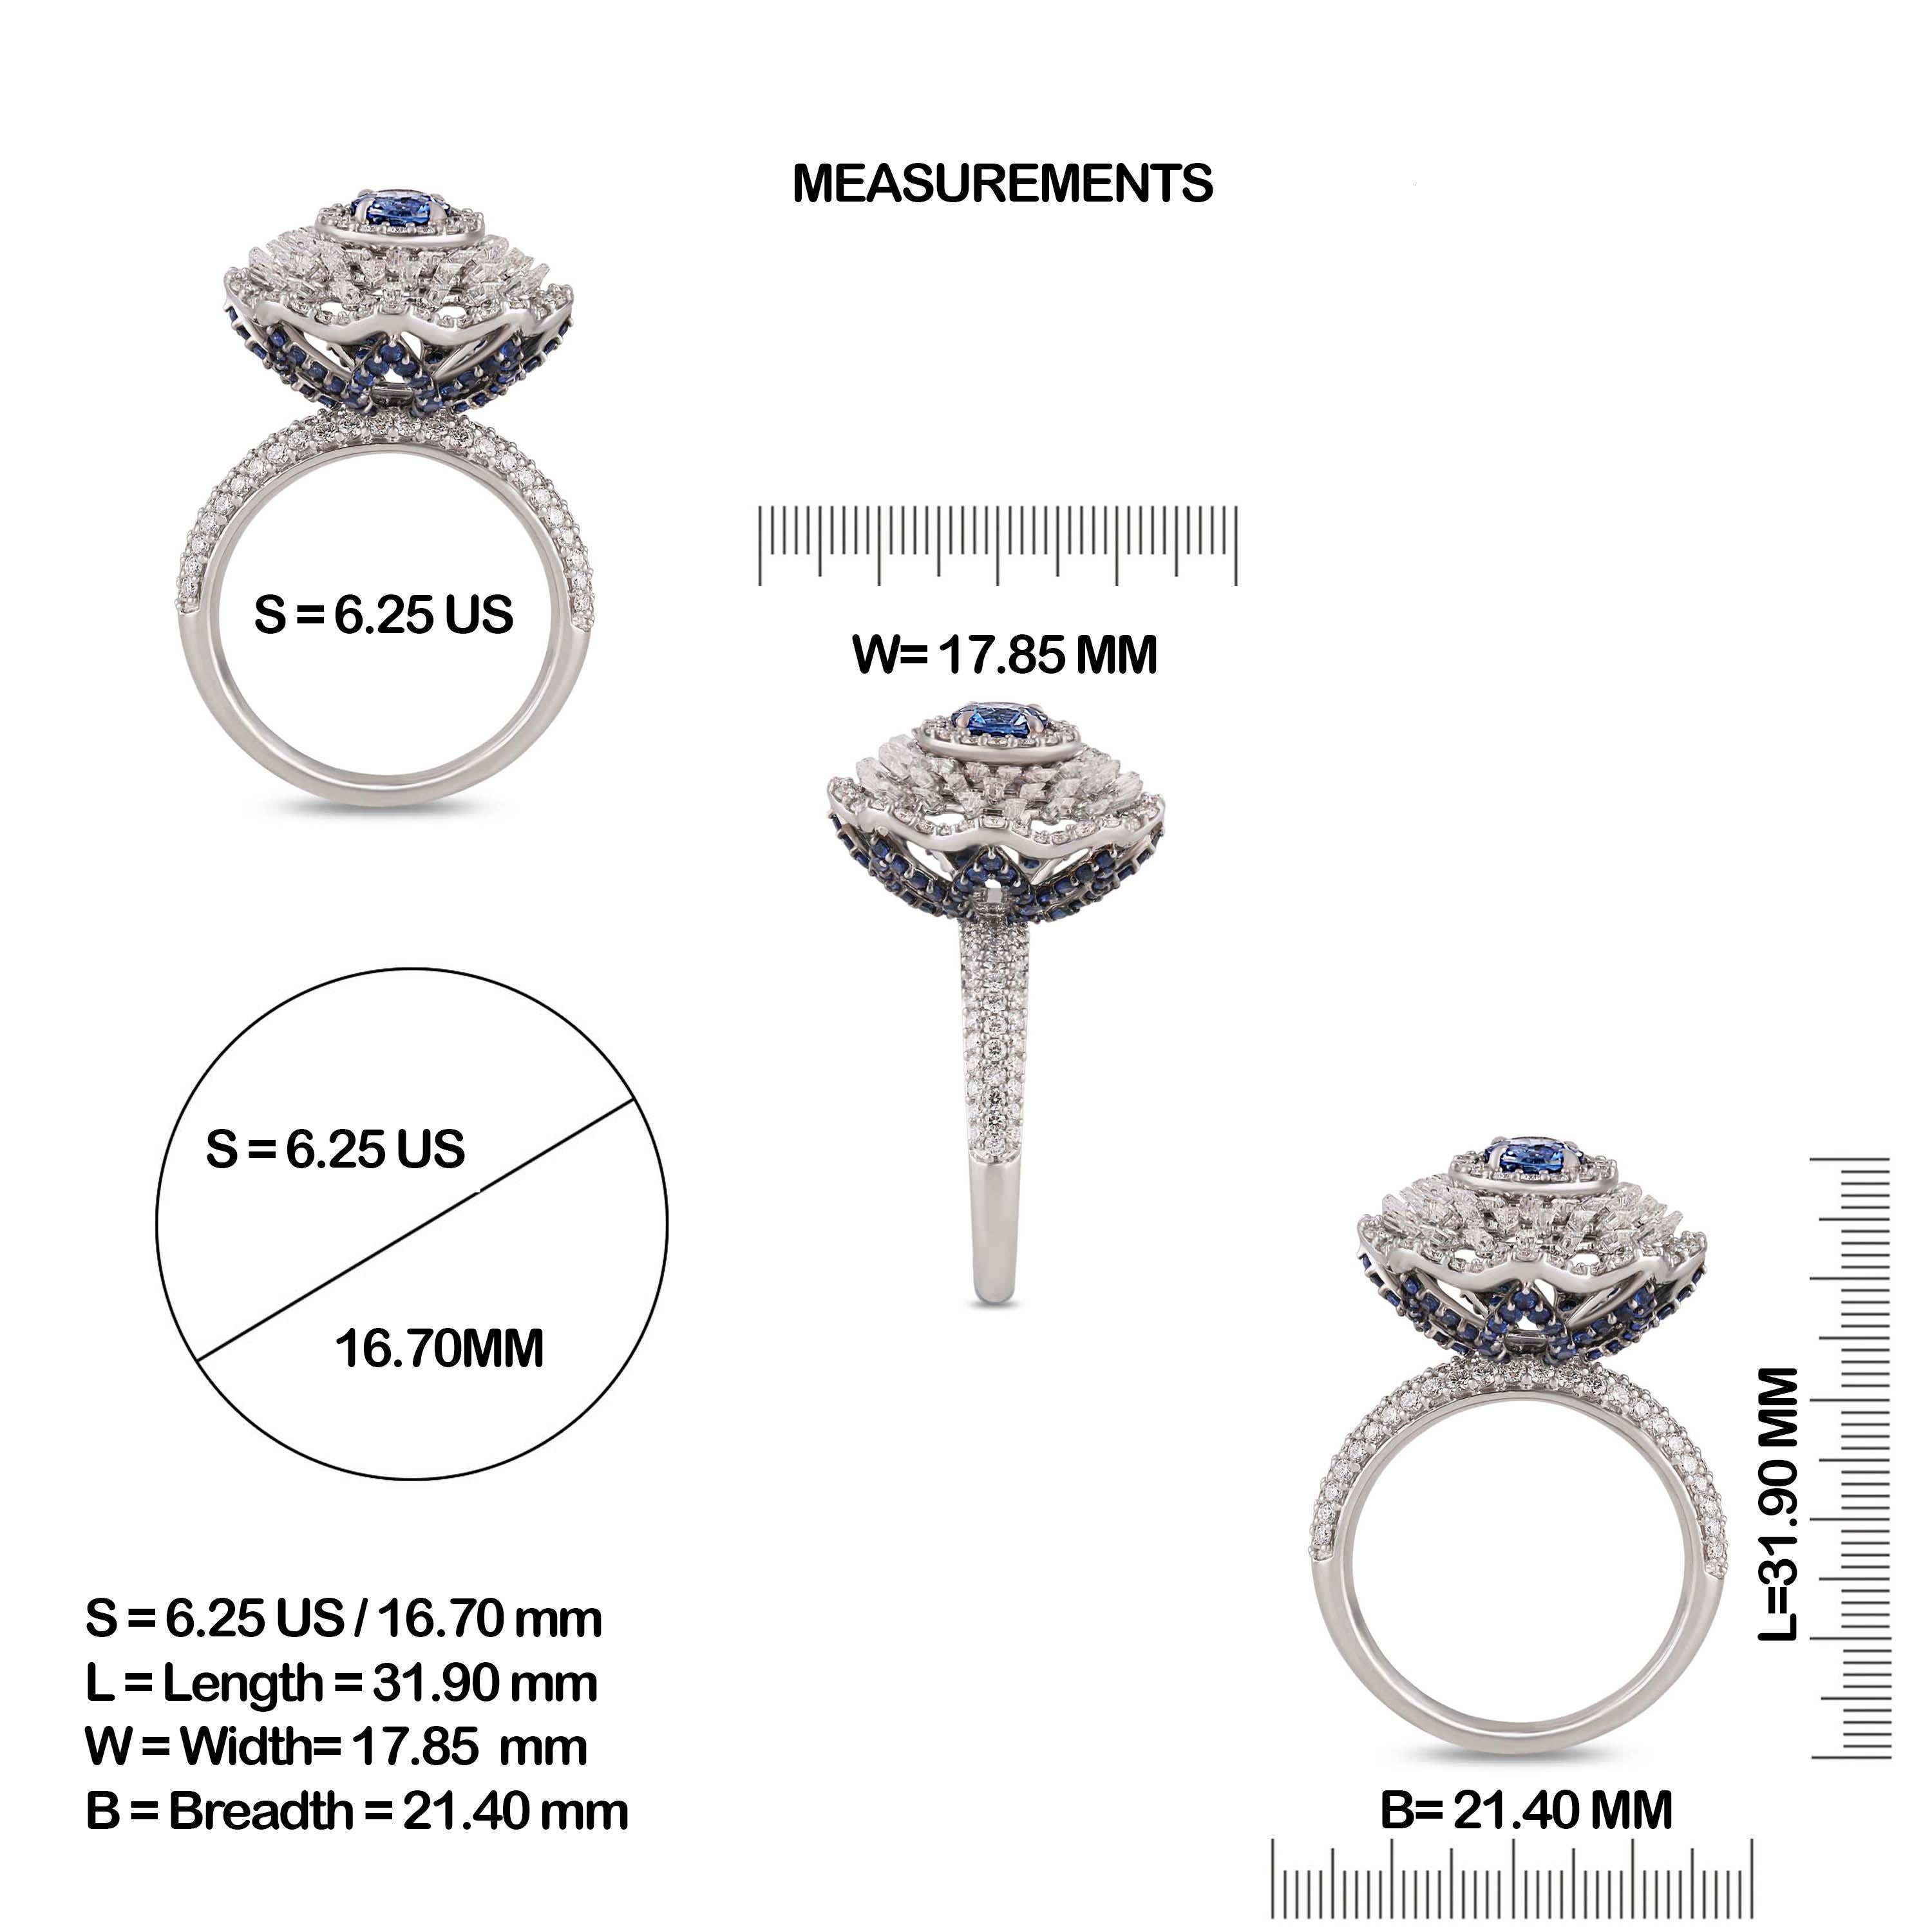 Gross Weight: 8.05 Grams
Diamond Weight: 1.60 cts
Blue Sapphire Weight: 1.34 cts
Ring Size: US 6 ¼ (Resizing can be Done)
IGI Certification can be done on Request

Video of the product can be shared on request.

A piece of jewellery that brightens